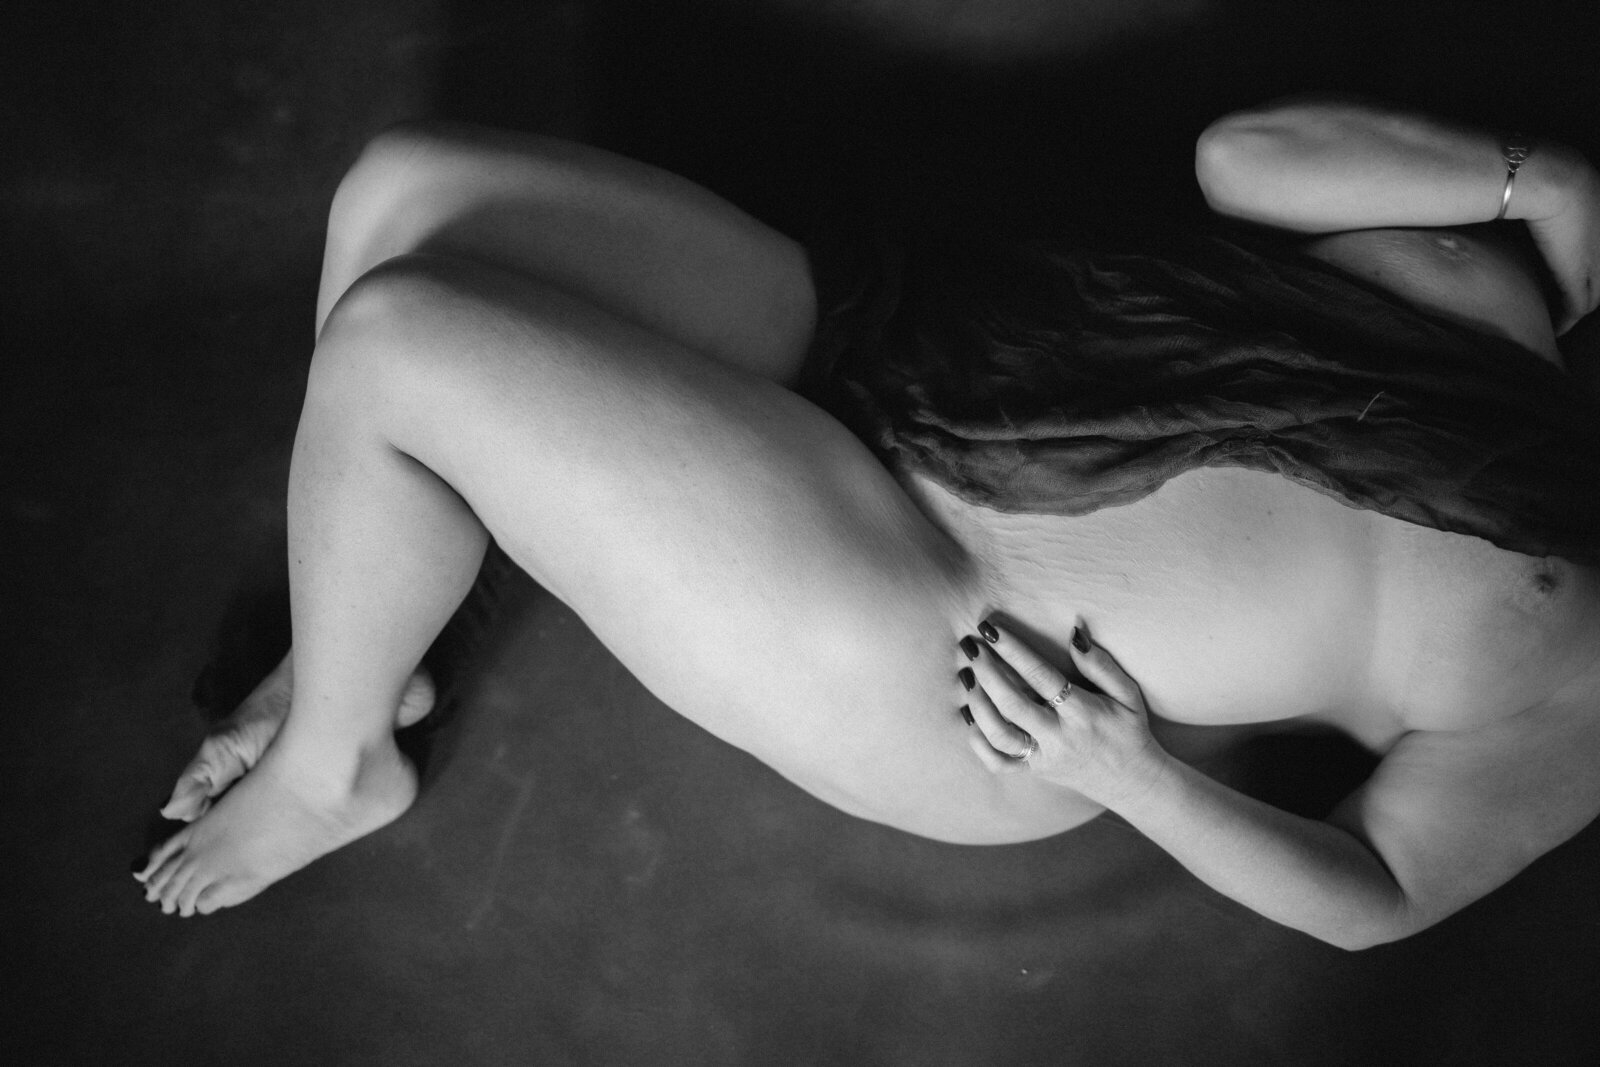 Black and white nude photo of a woman